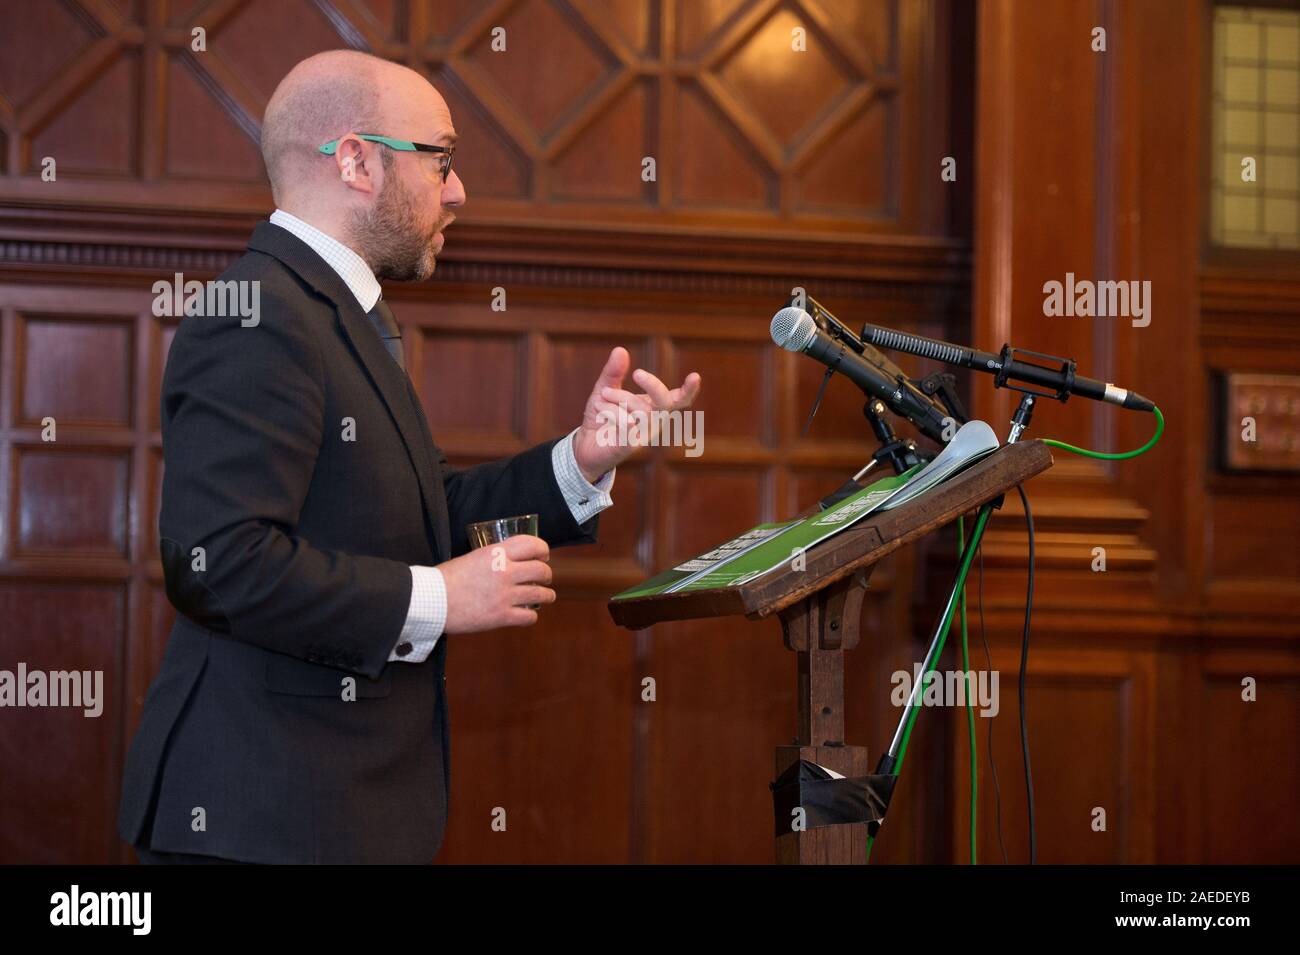 Glasgow, UK. 25 November 2019. Pictured: Patrick Harvie MSP - Co Leader of the Scottish Green Party. Credit: Colin Fisher/Alamy Live News. Stock Photo